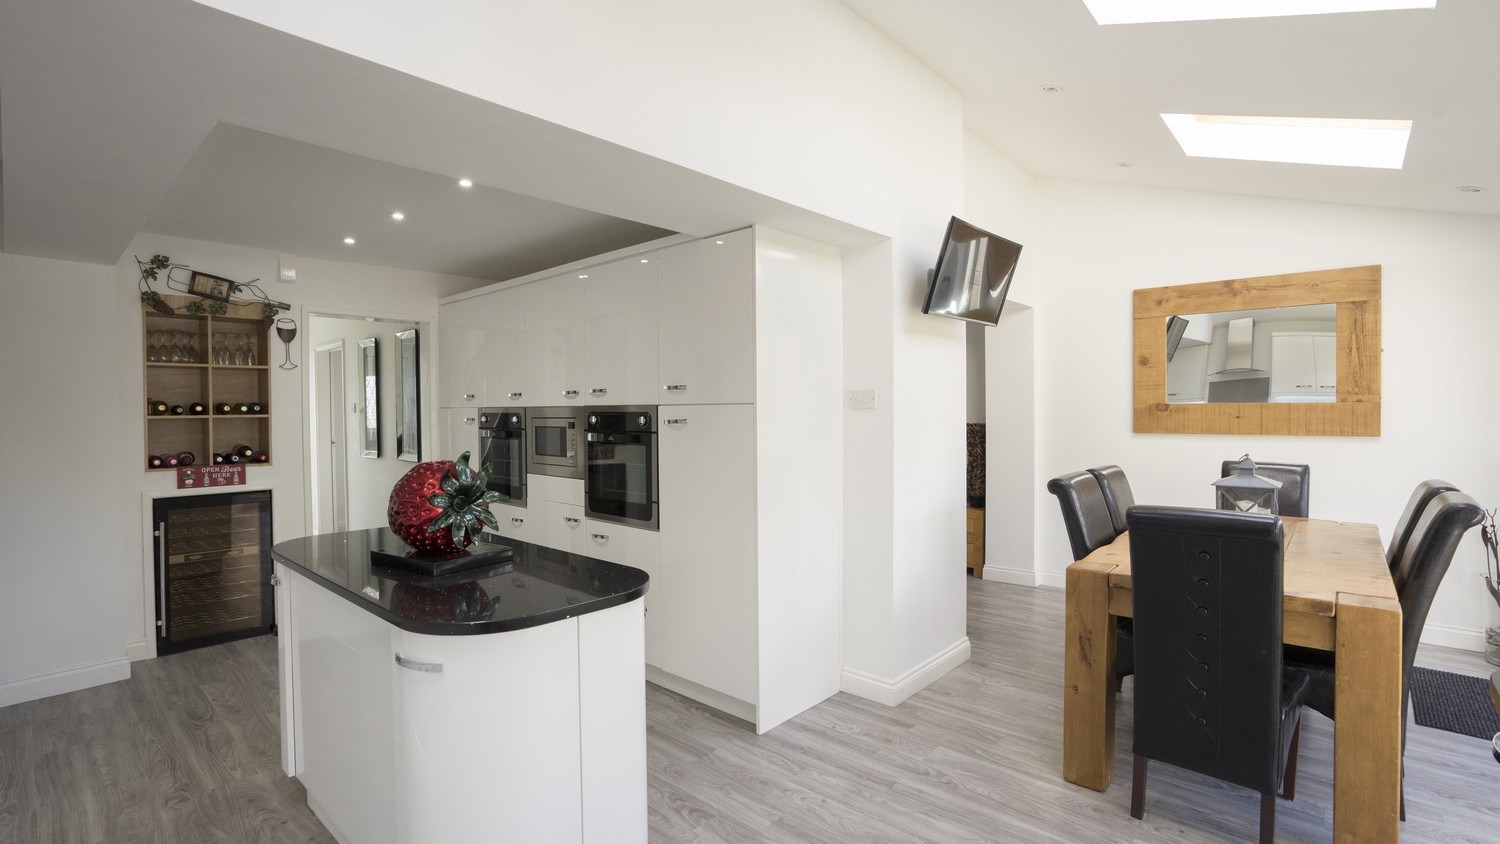 White gloss kitchen supplied with mirror black granite worktops as part of this open plan re-model.